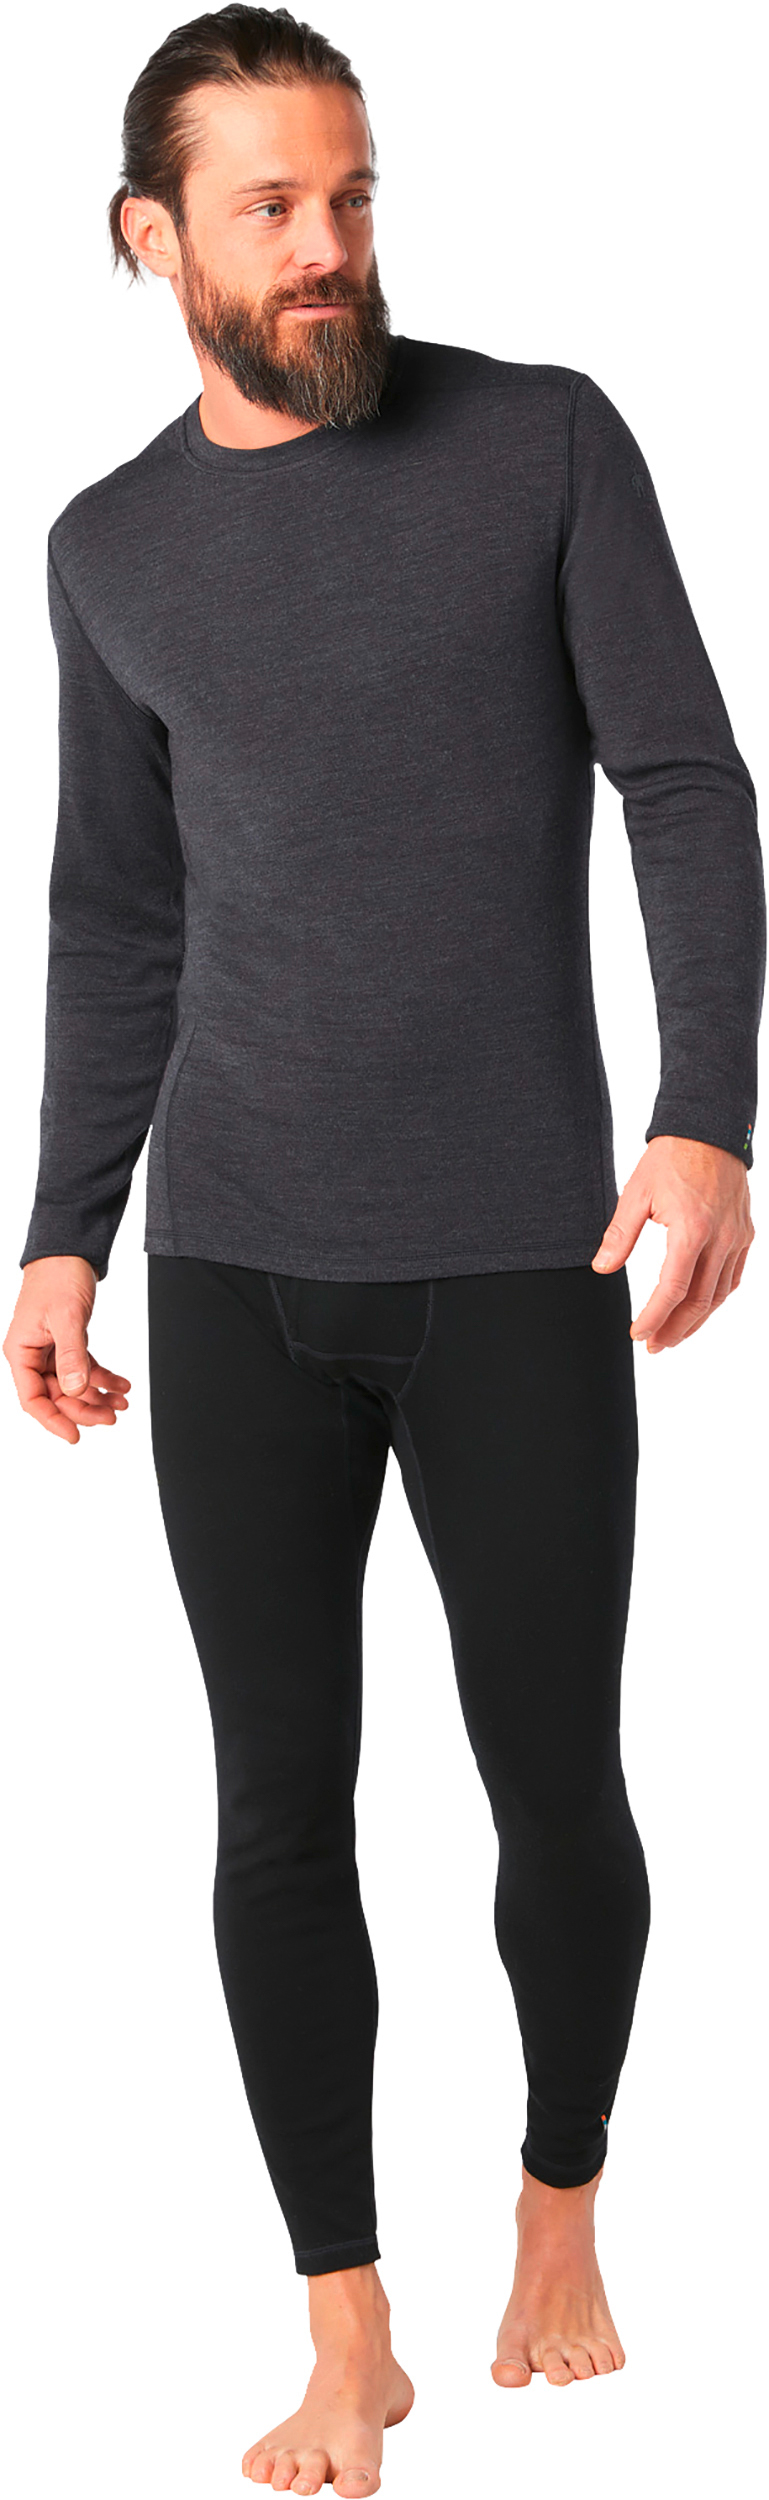 Smartwool Men's Classic Thermal Merino Base Later Bottom Tights